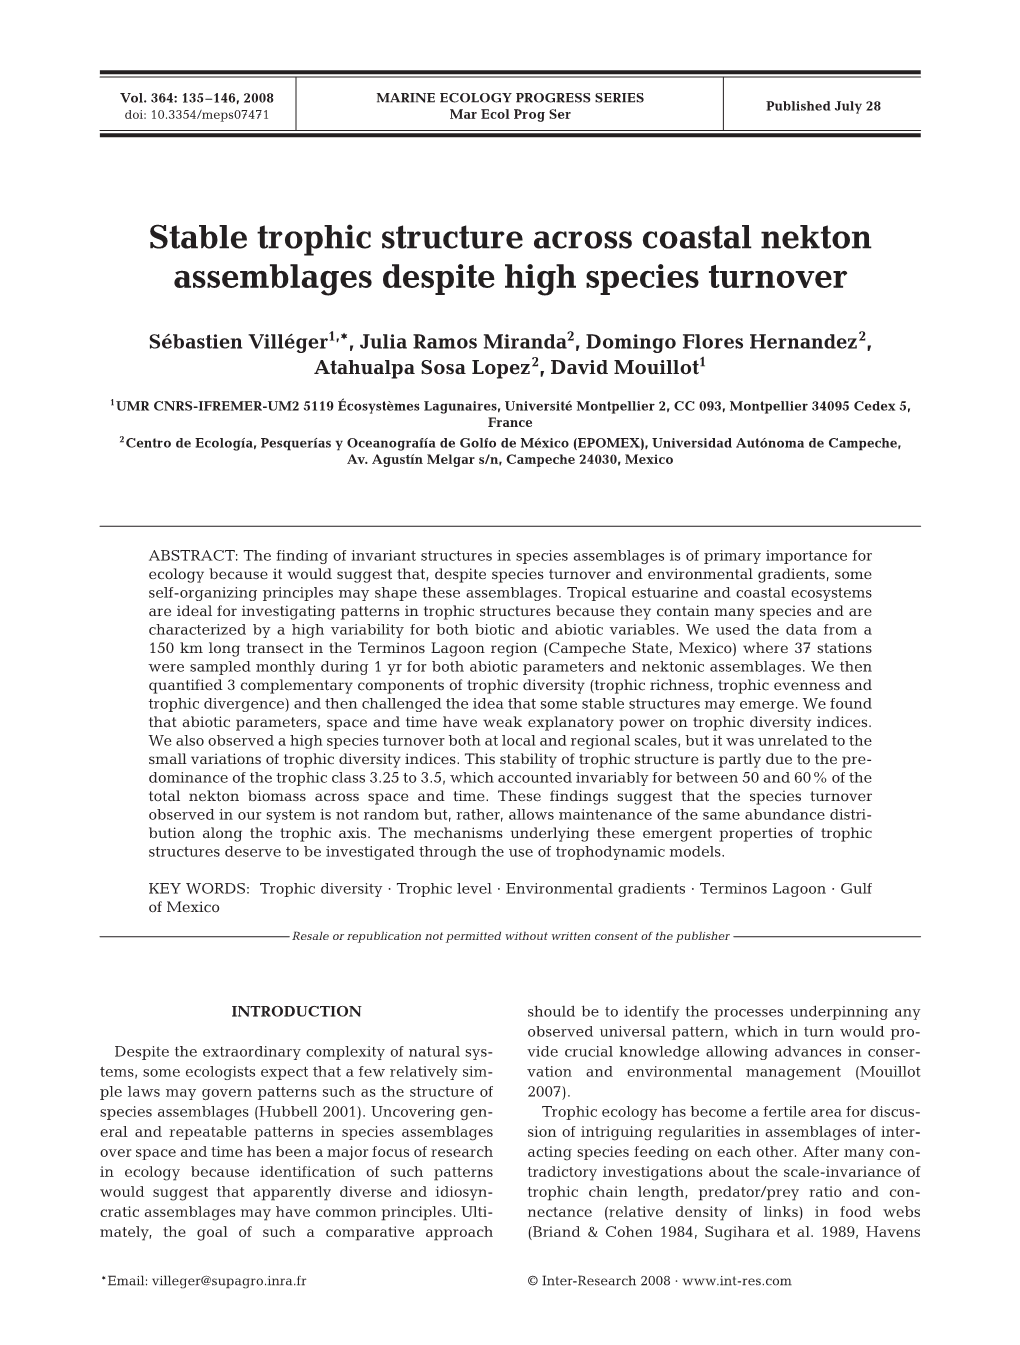 Stable Trophic Structure Across Coastal Nekton Assemblages Despite High Species Turnover